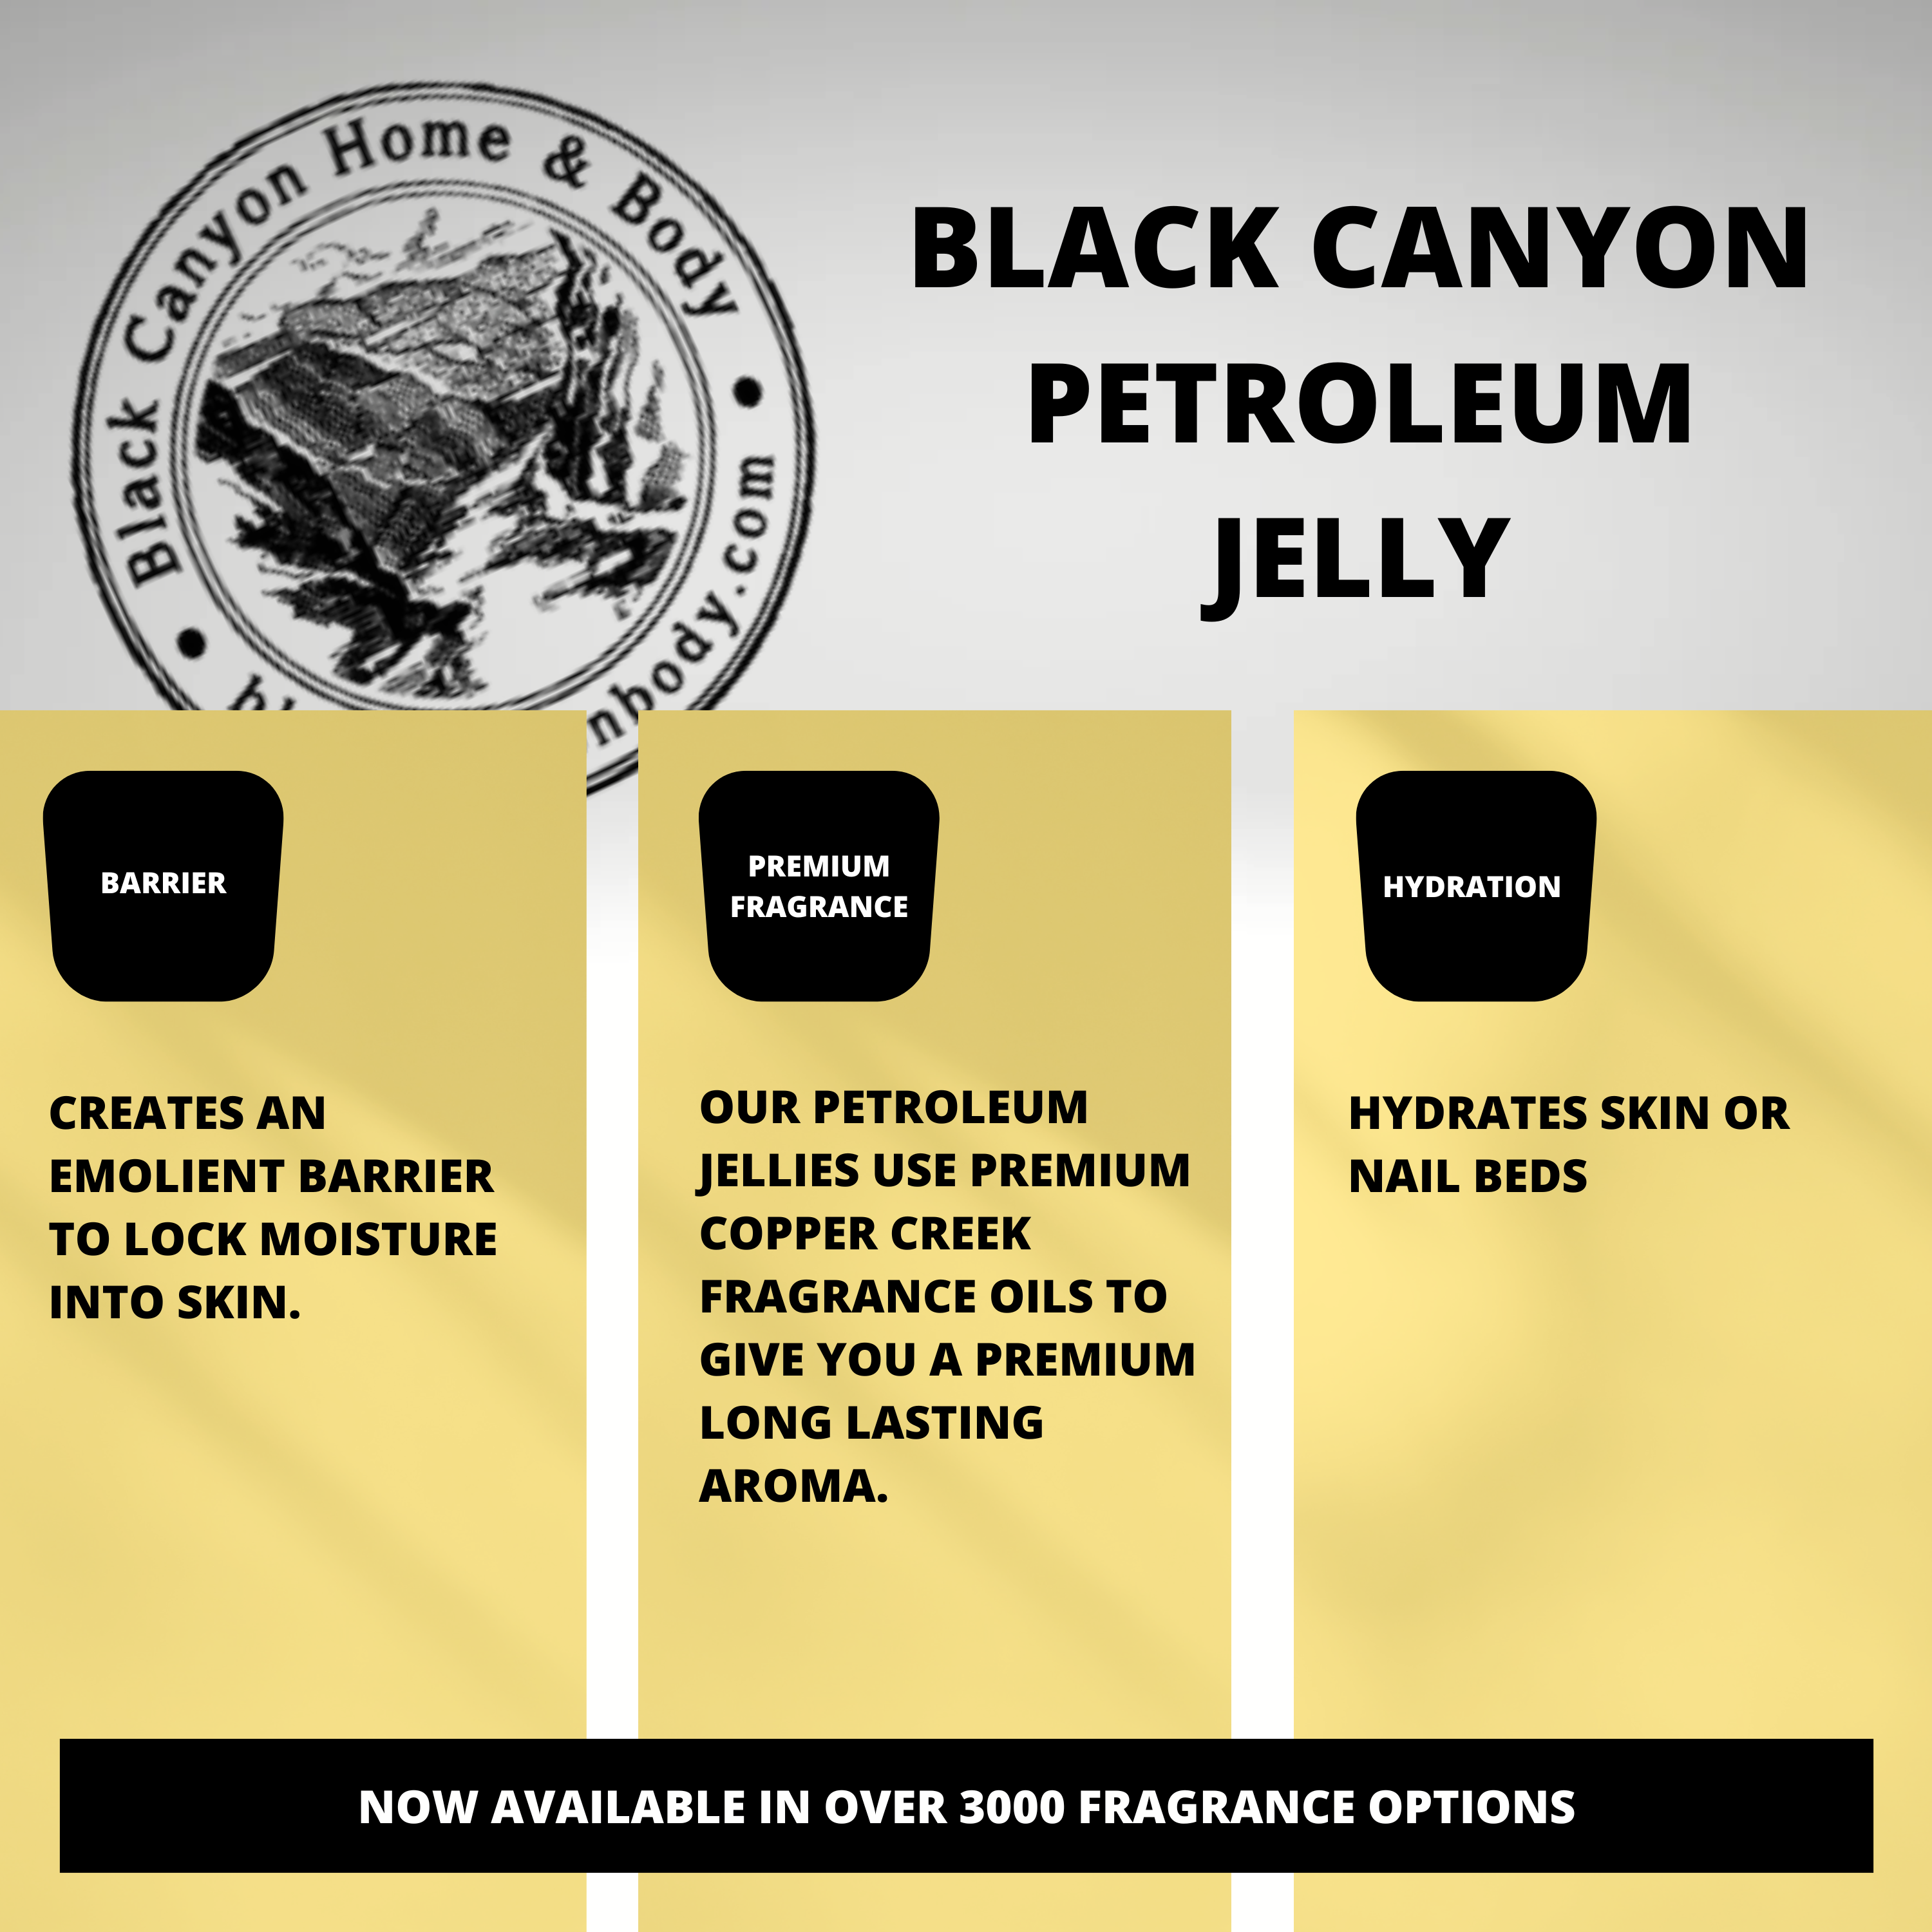 Black Canyon Blackberry & Fir Scented Petroleum Jelly